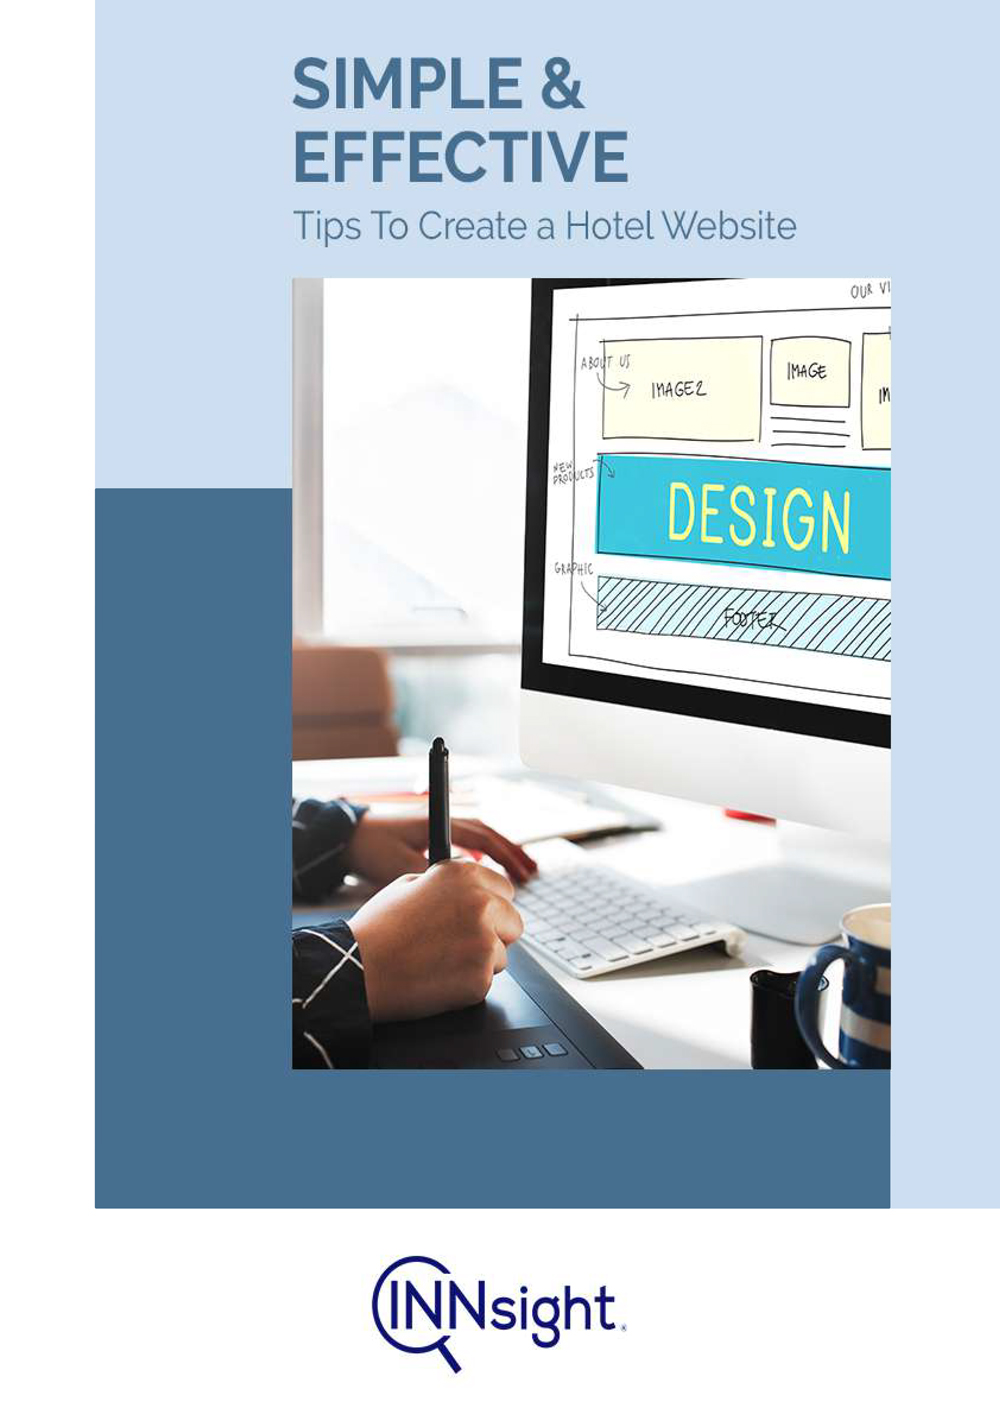 Simple & Effective Tips To Create a Successful Hotel Website